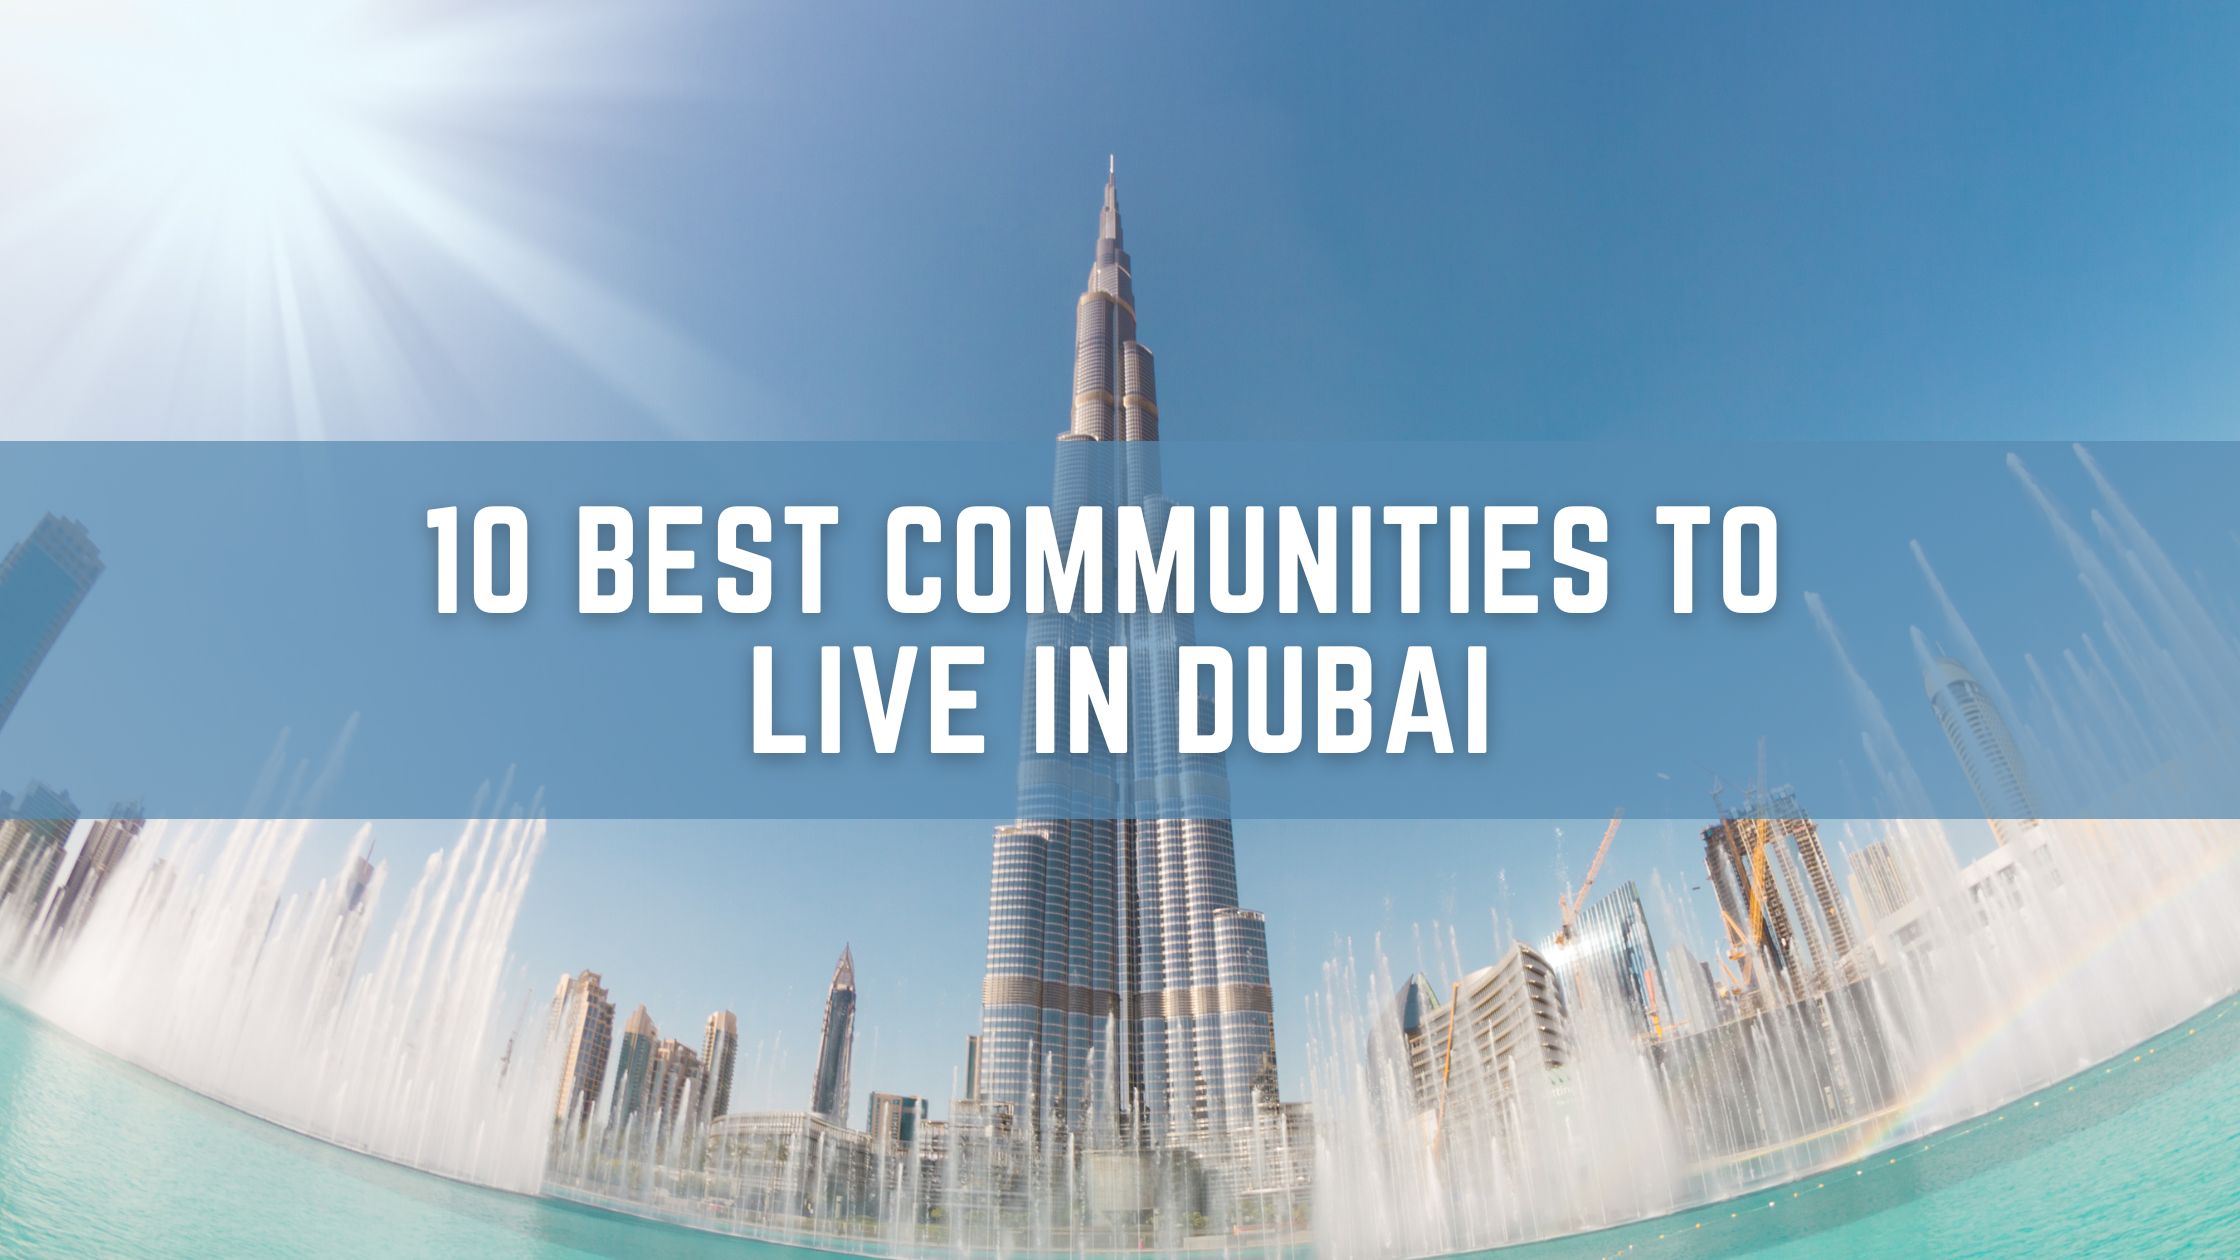 10 Best Communities to Live in Dubai: Discover Your Dream Neighborhood